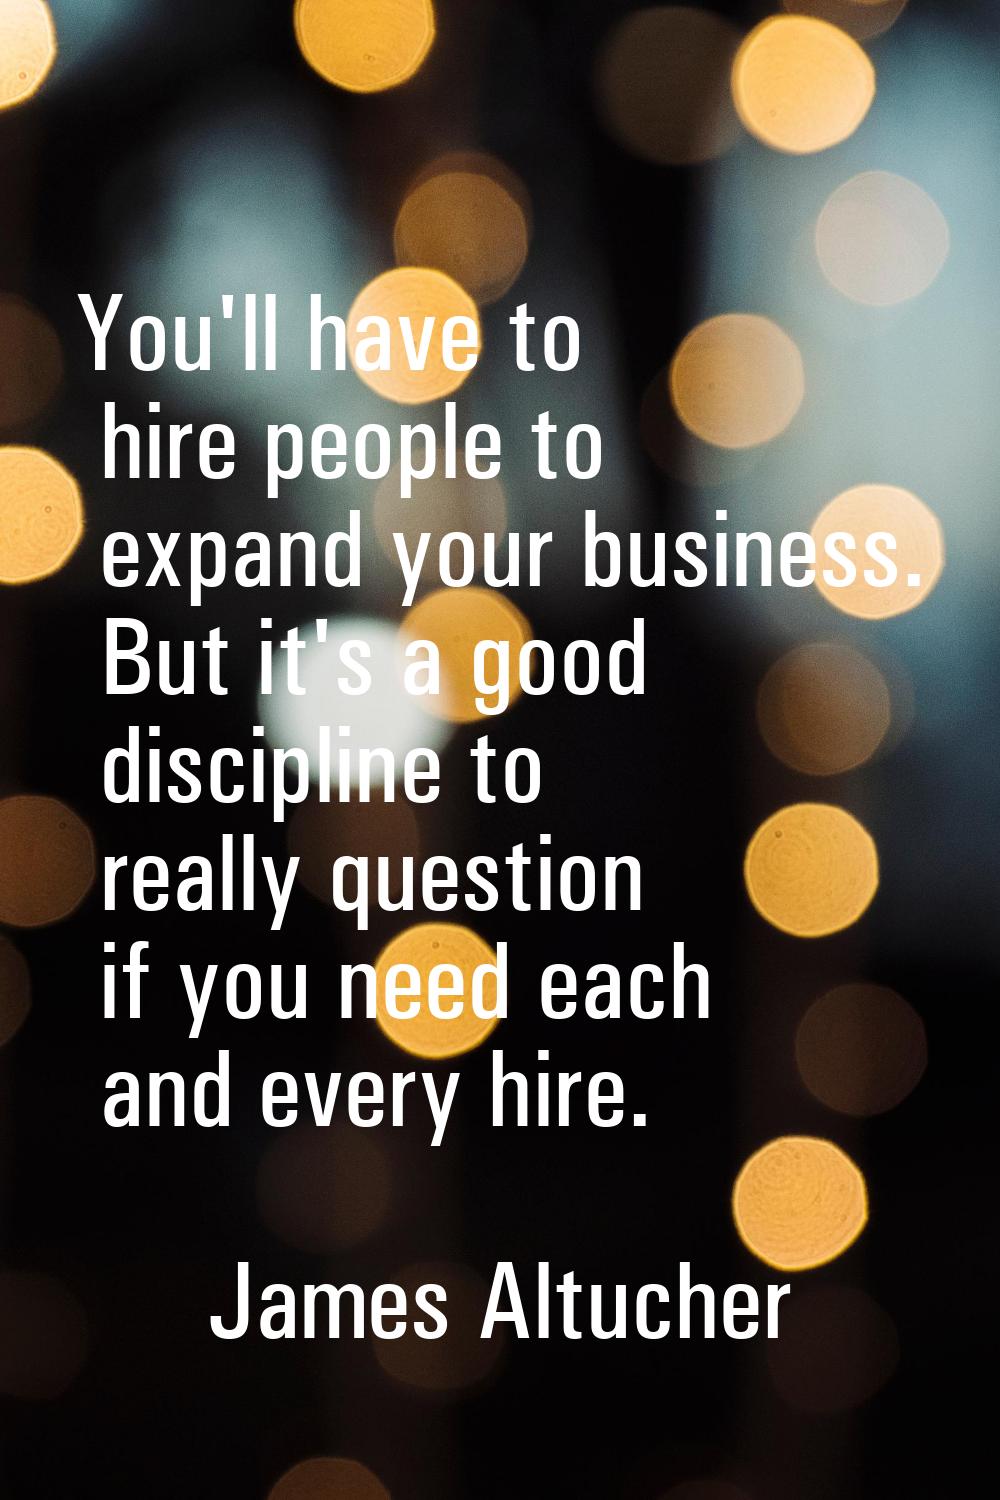 You'll have to hire people to expand your business. But it's a good discipline to really question i